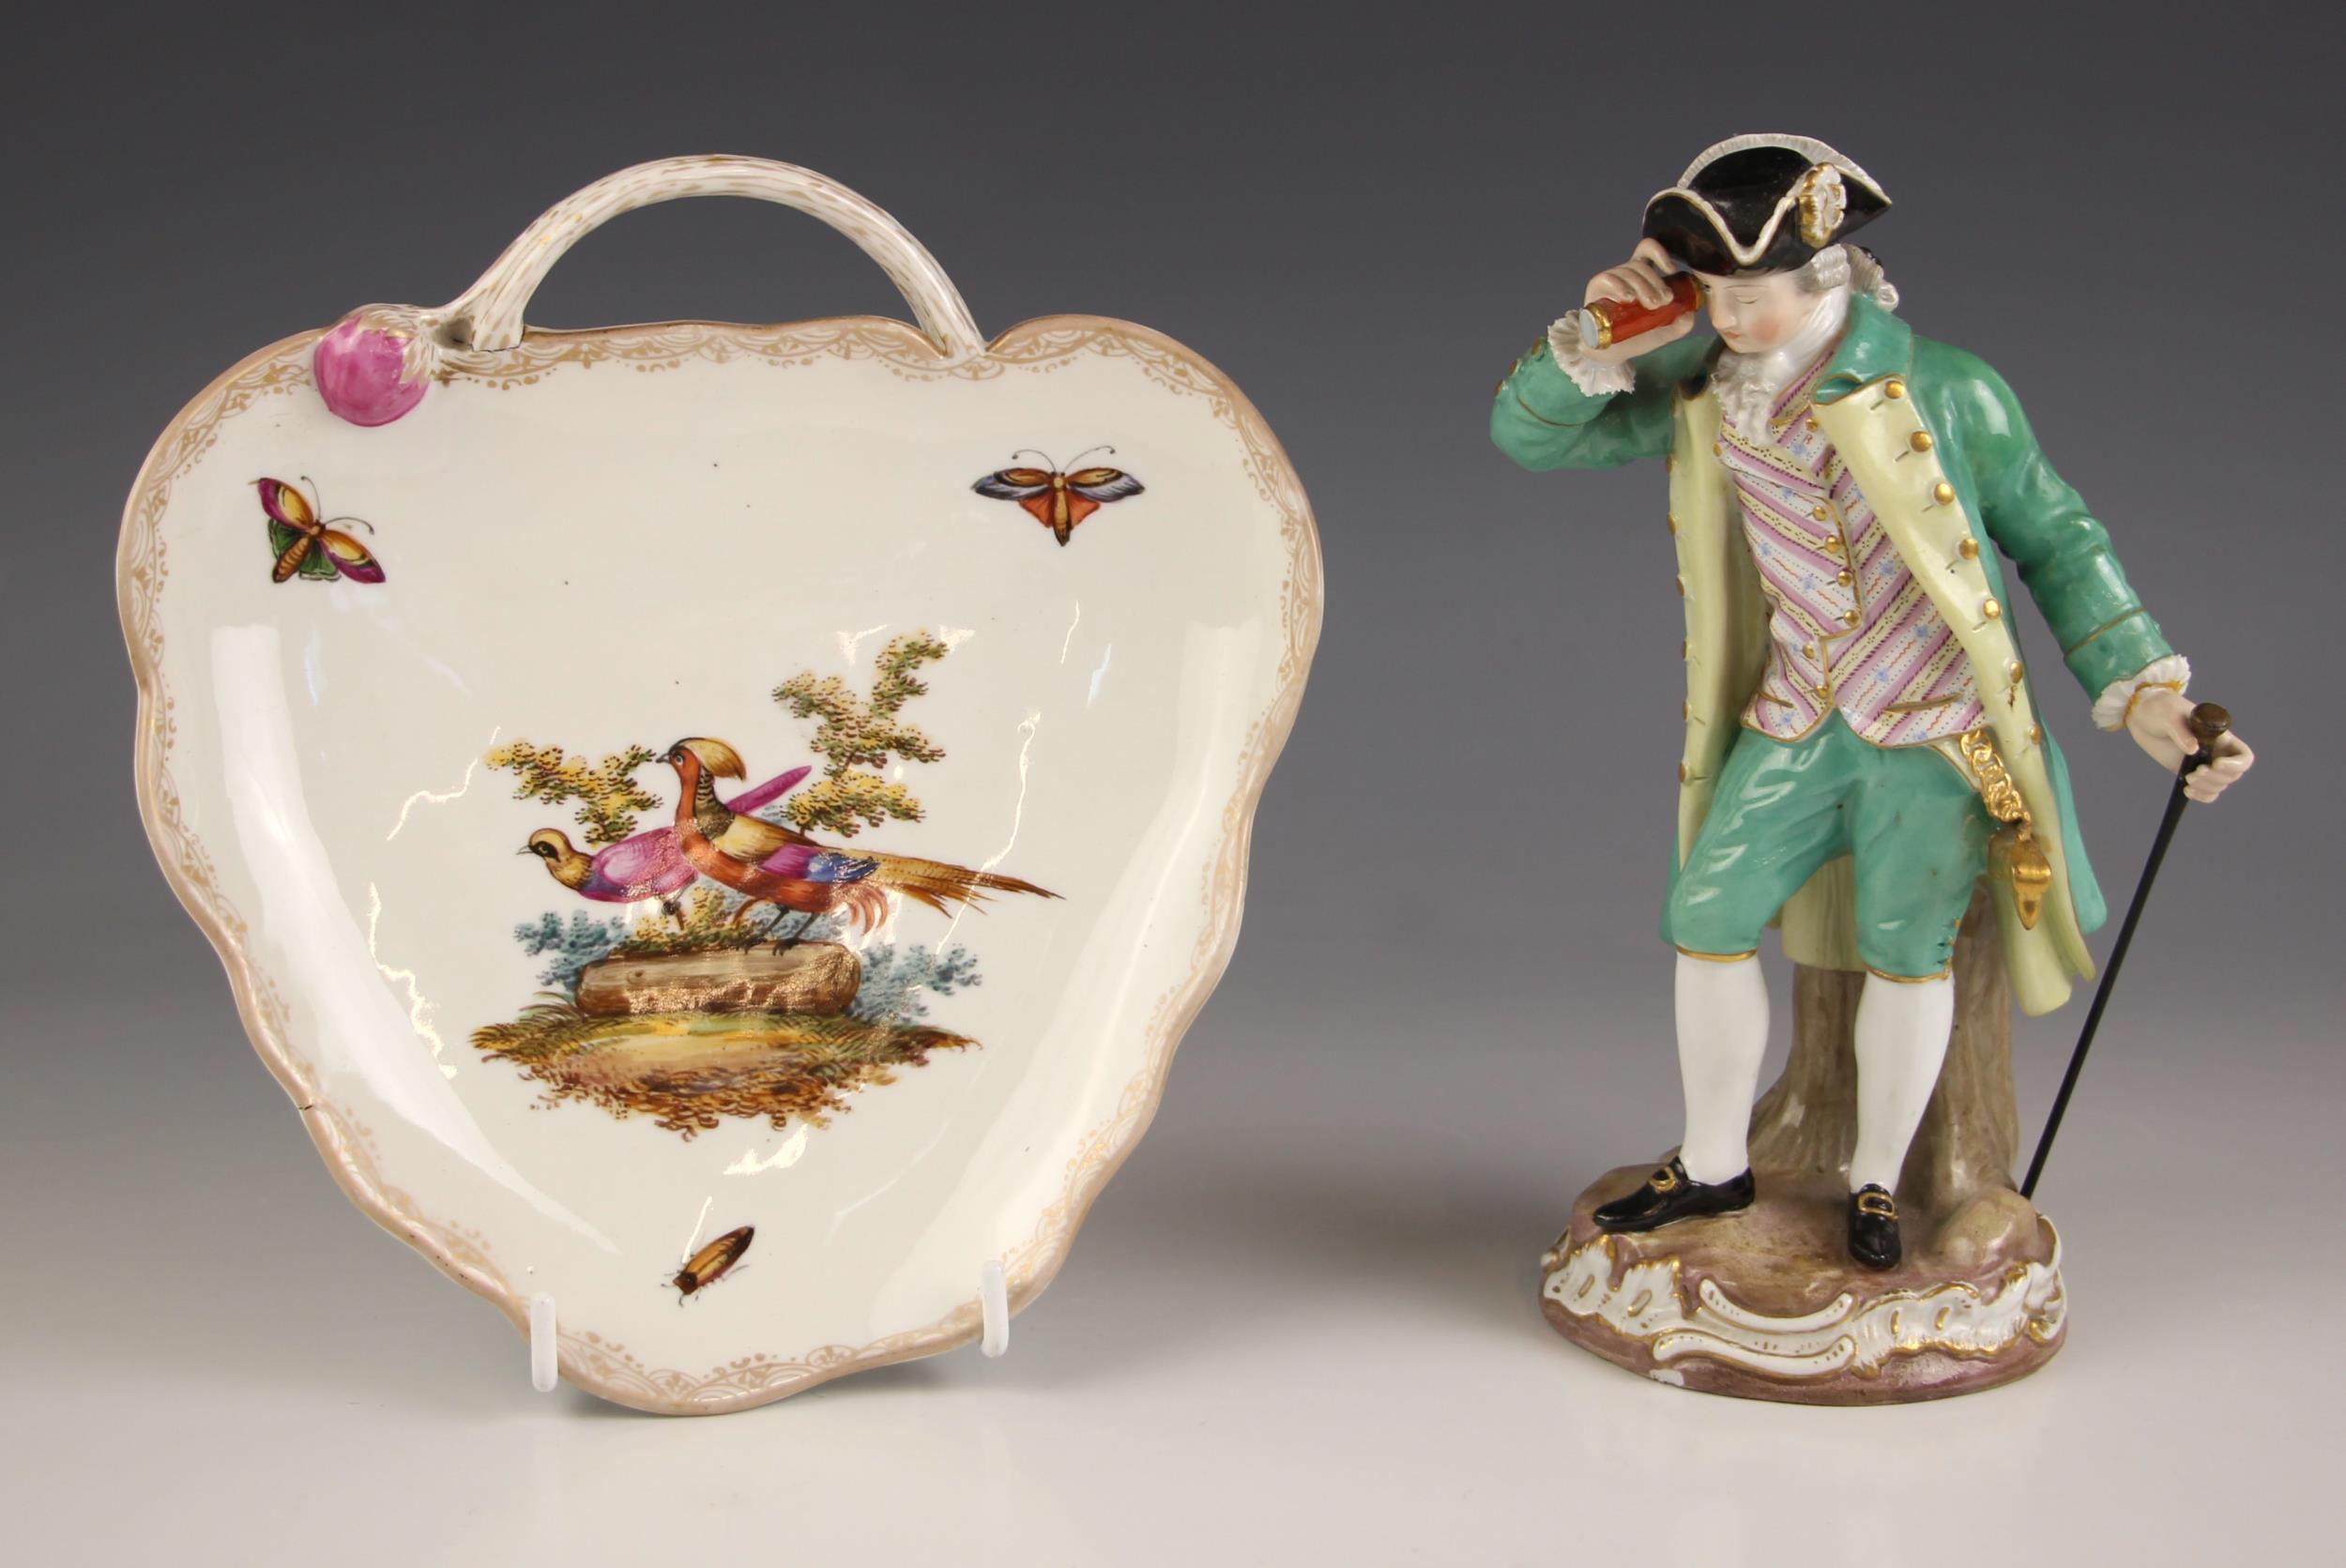 A Meissen figure, 19th century, of a gentleman with tri-corn hat, turquoise overcoat and breeches